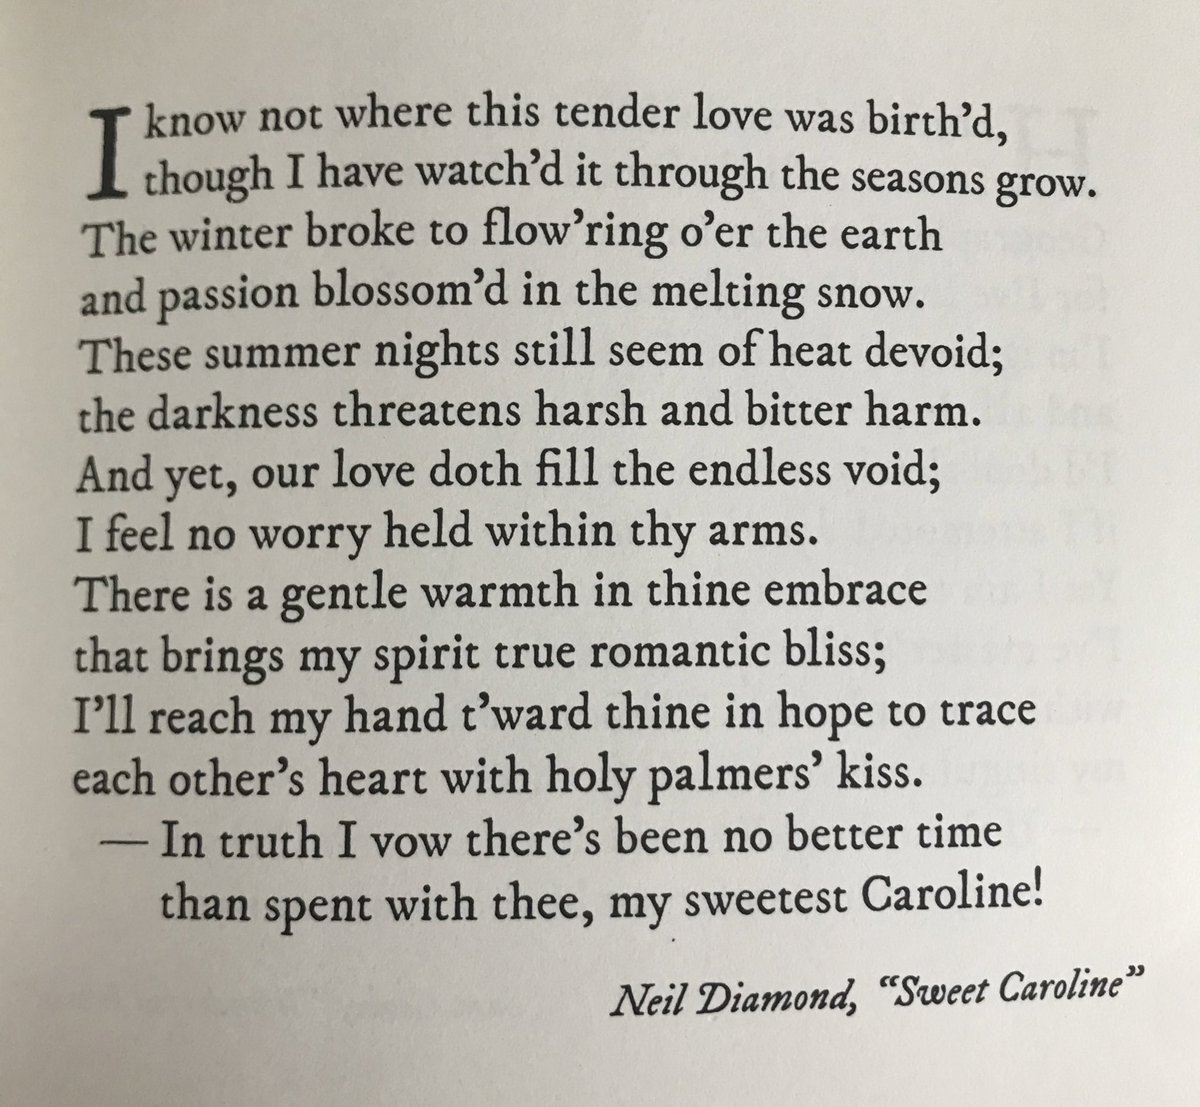 12/. For instance, bc we’re all missing baseball, may I give you this Shakespearean-I mean Neil Diamond sonnet: